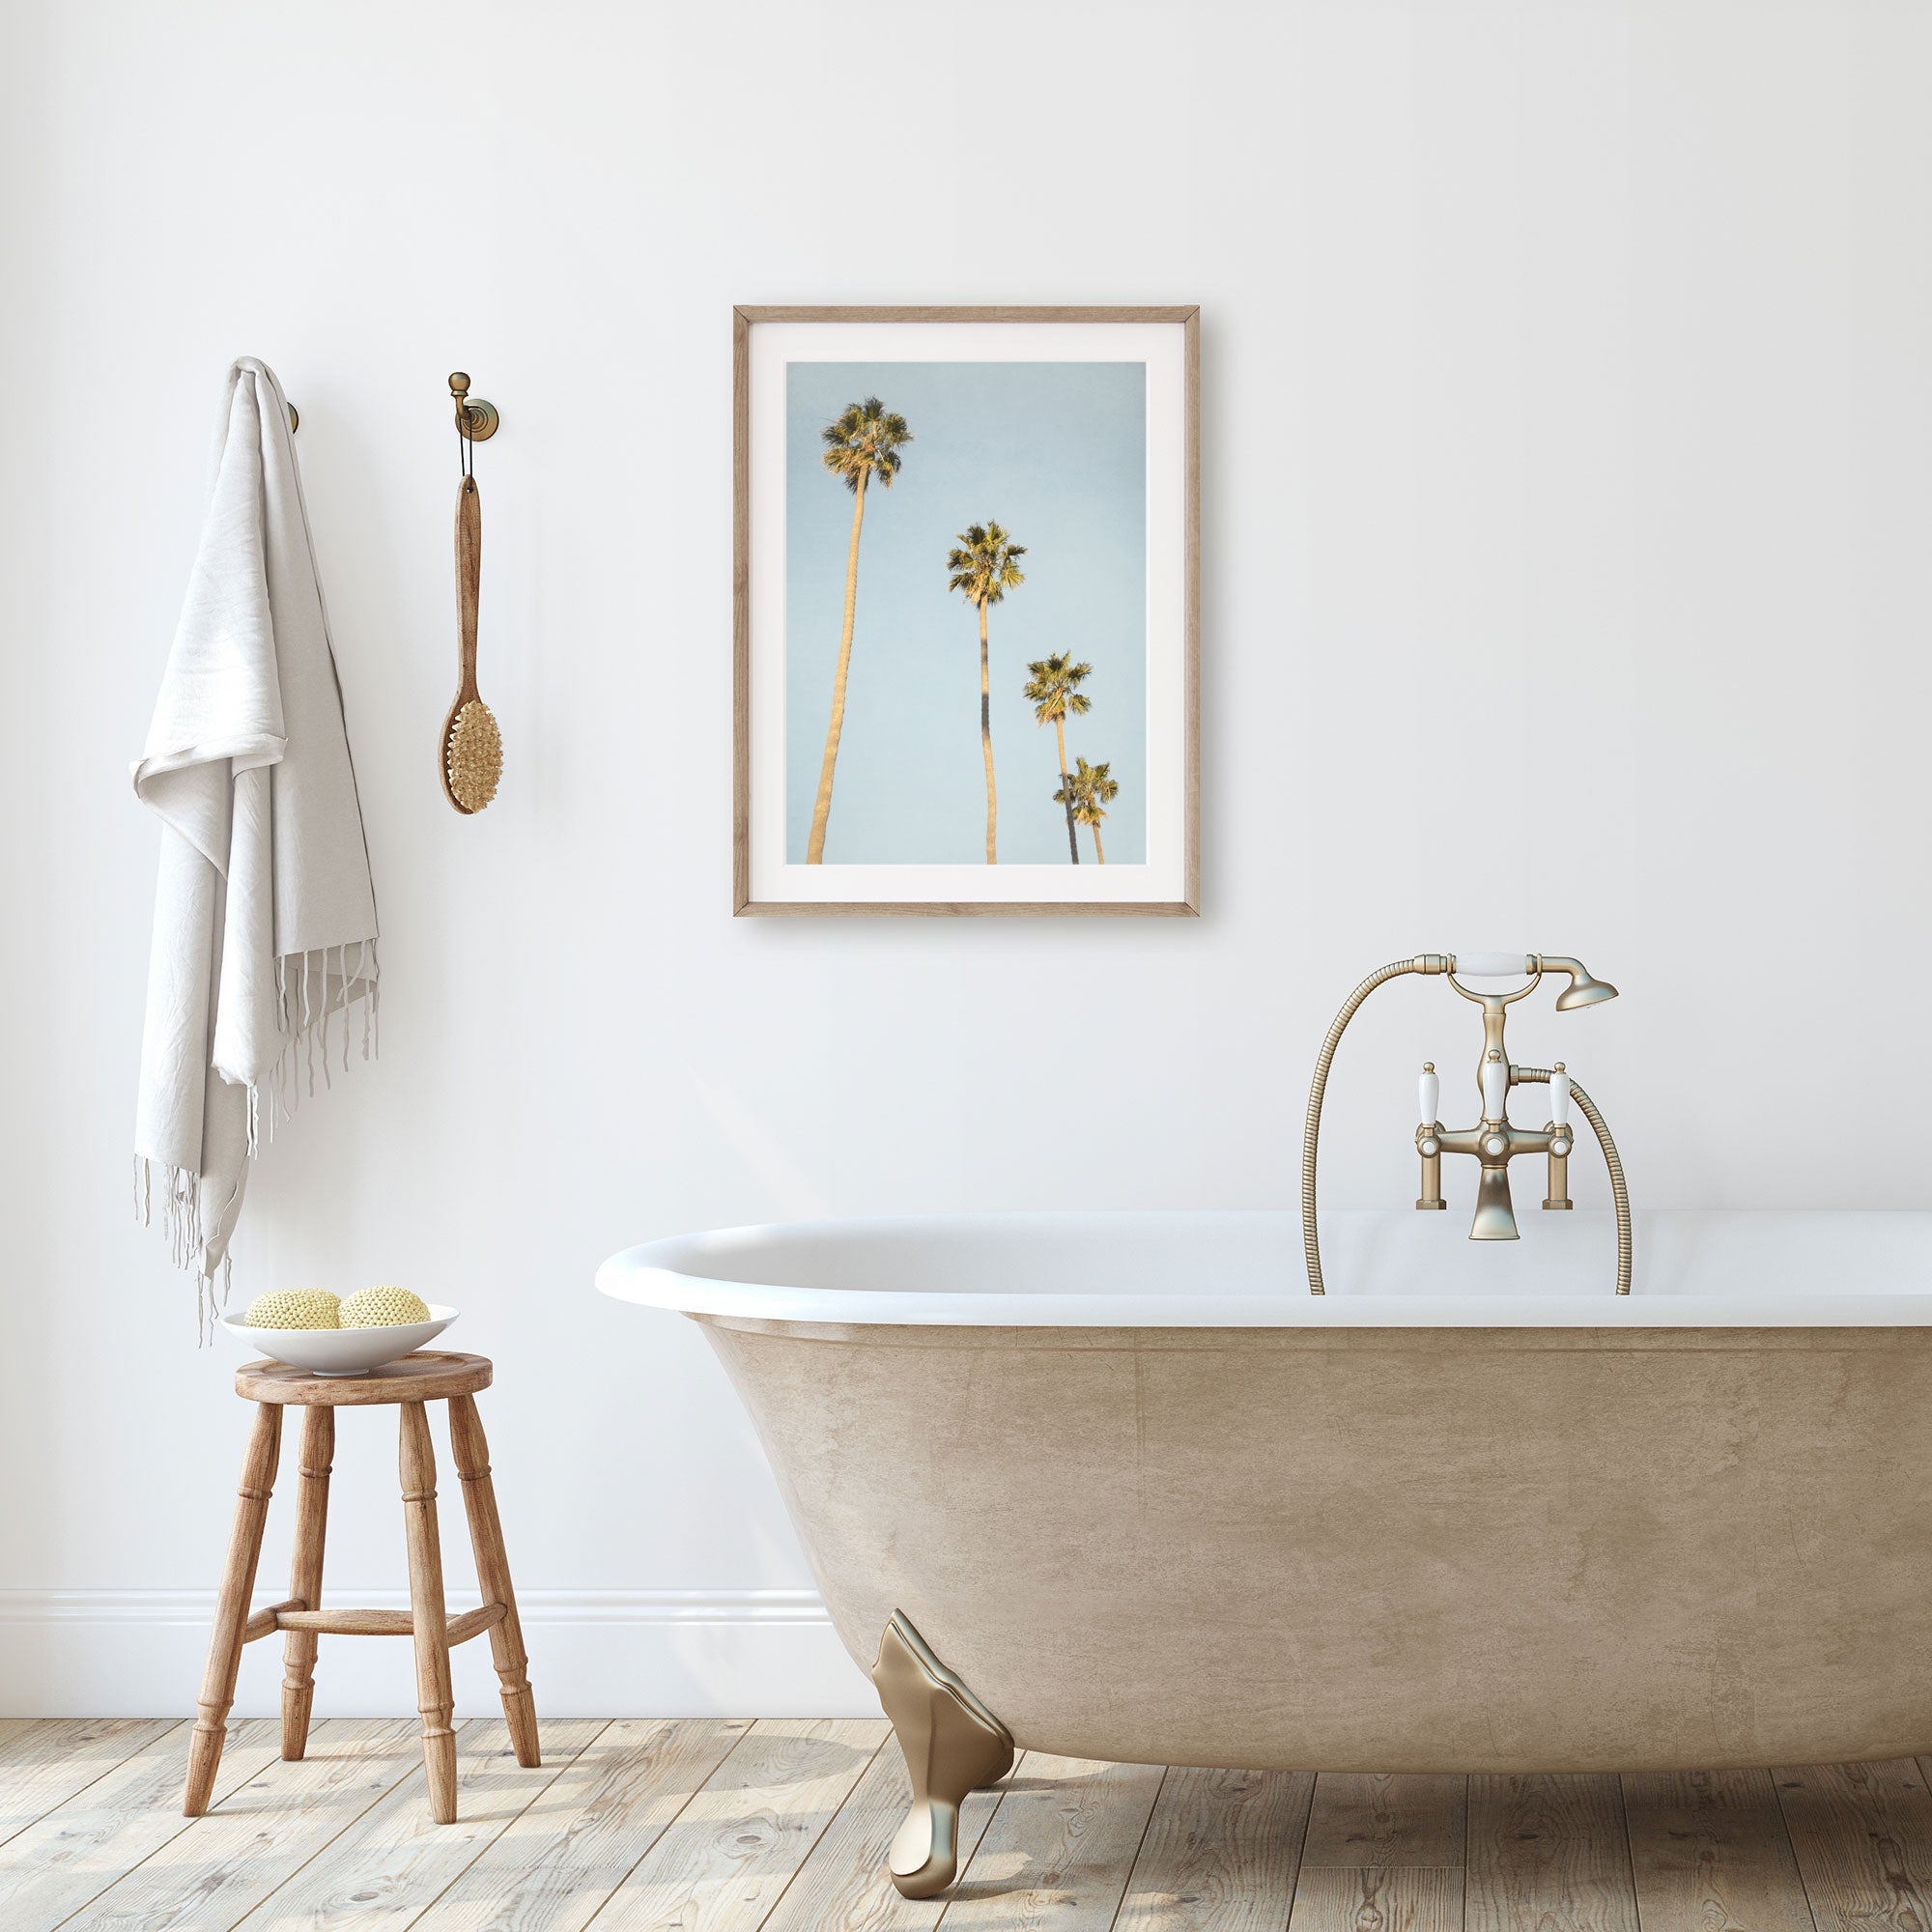 A minimalist bathroom featuring a standalone bathtub with gold clawfoot detail, a wooden stool, hanging towels, and a framed Offley Green Los Angeles Palm Tree Photographic Print 'Palm Stairs to Heaven' on the wall.